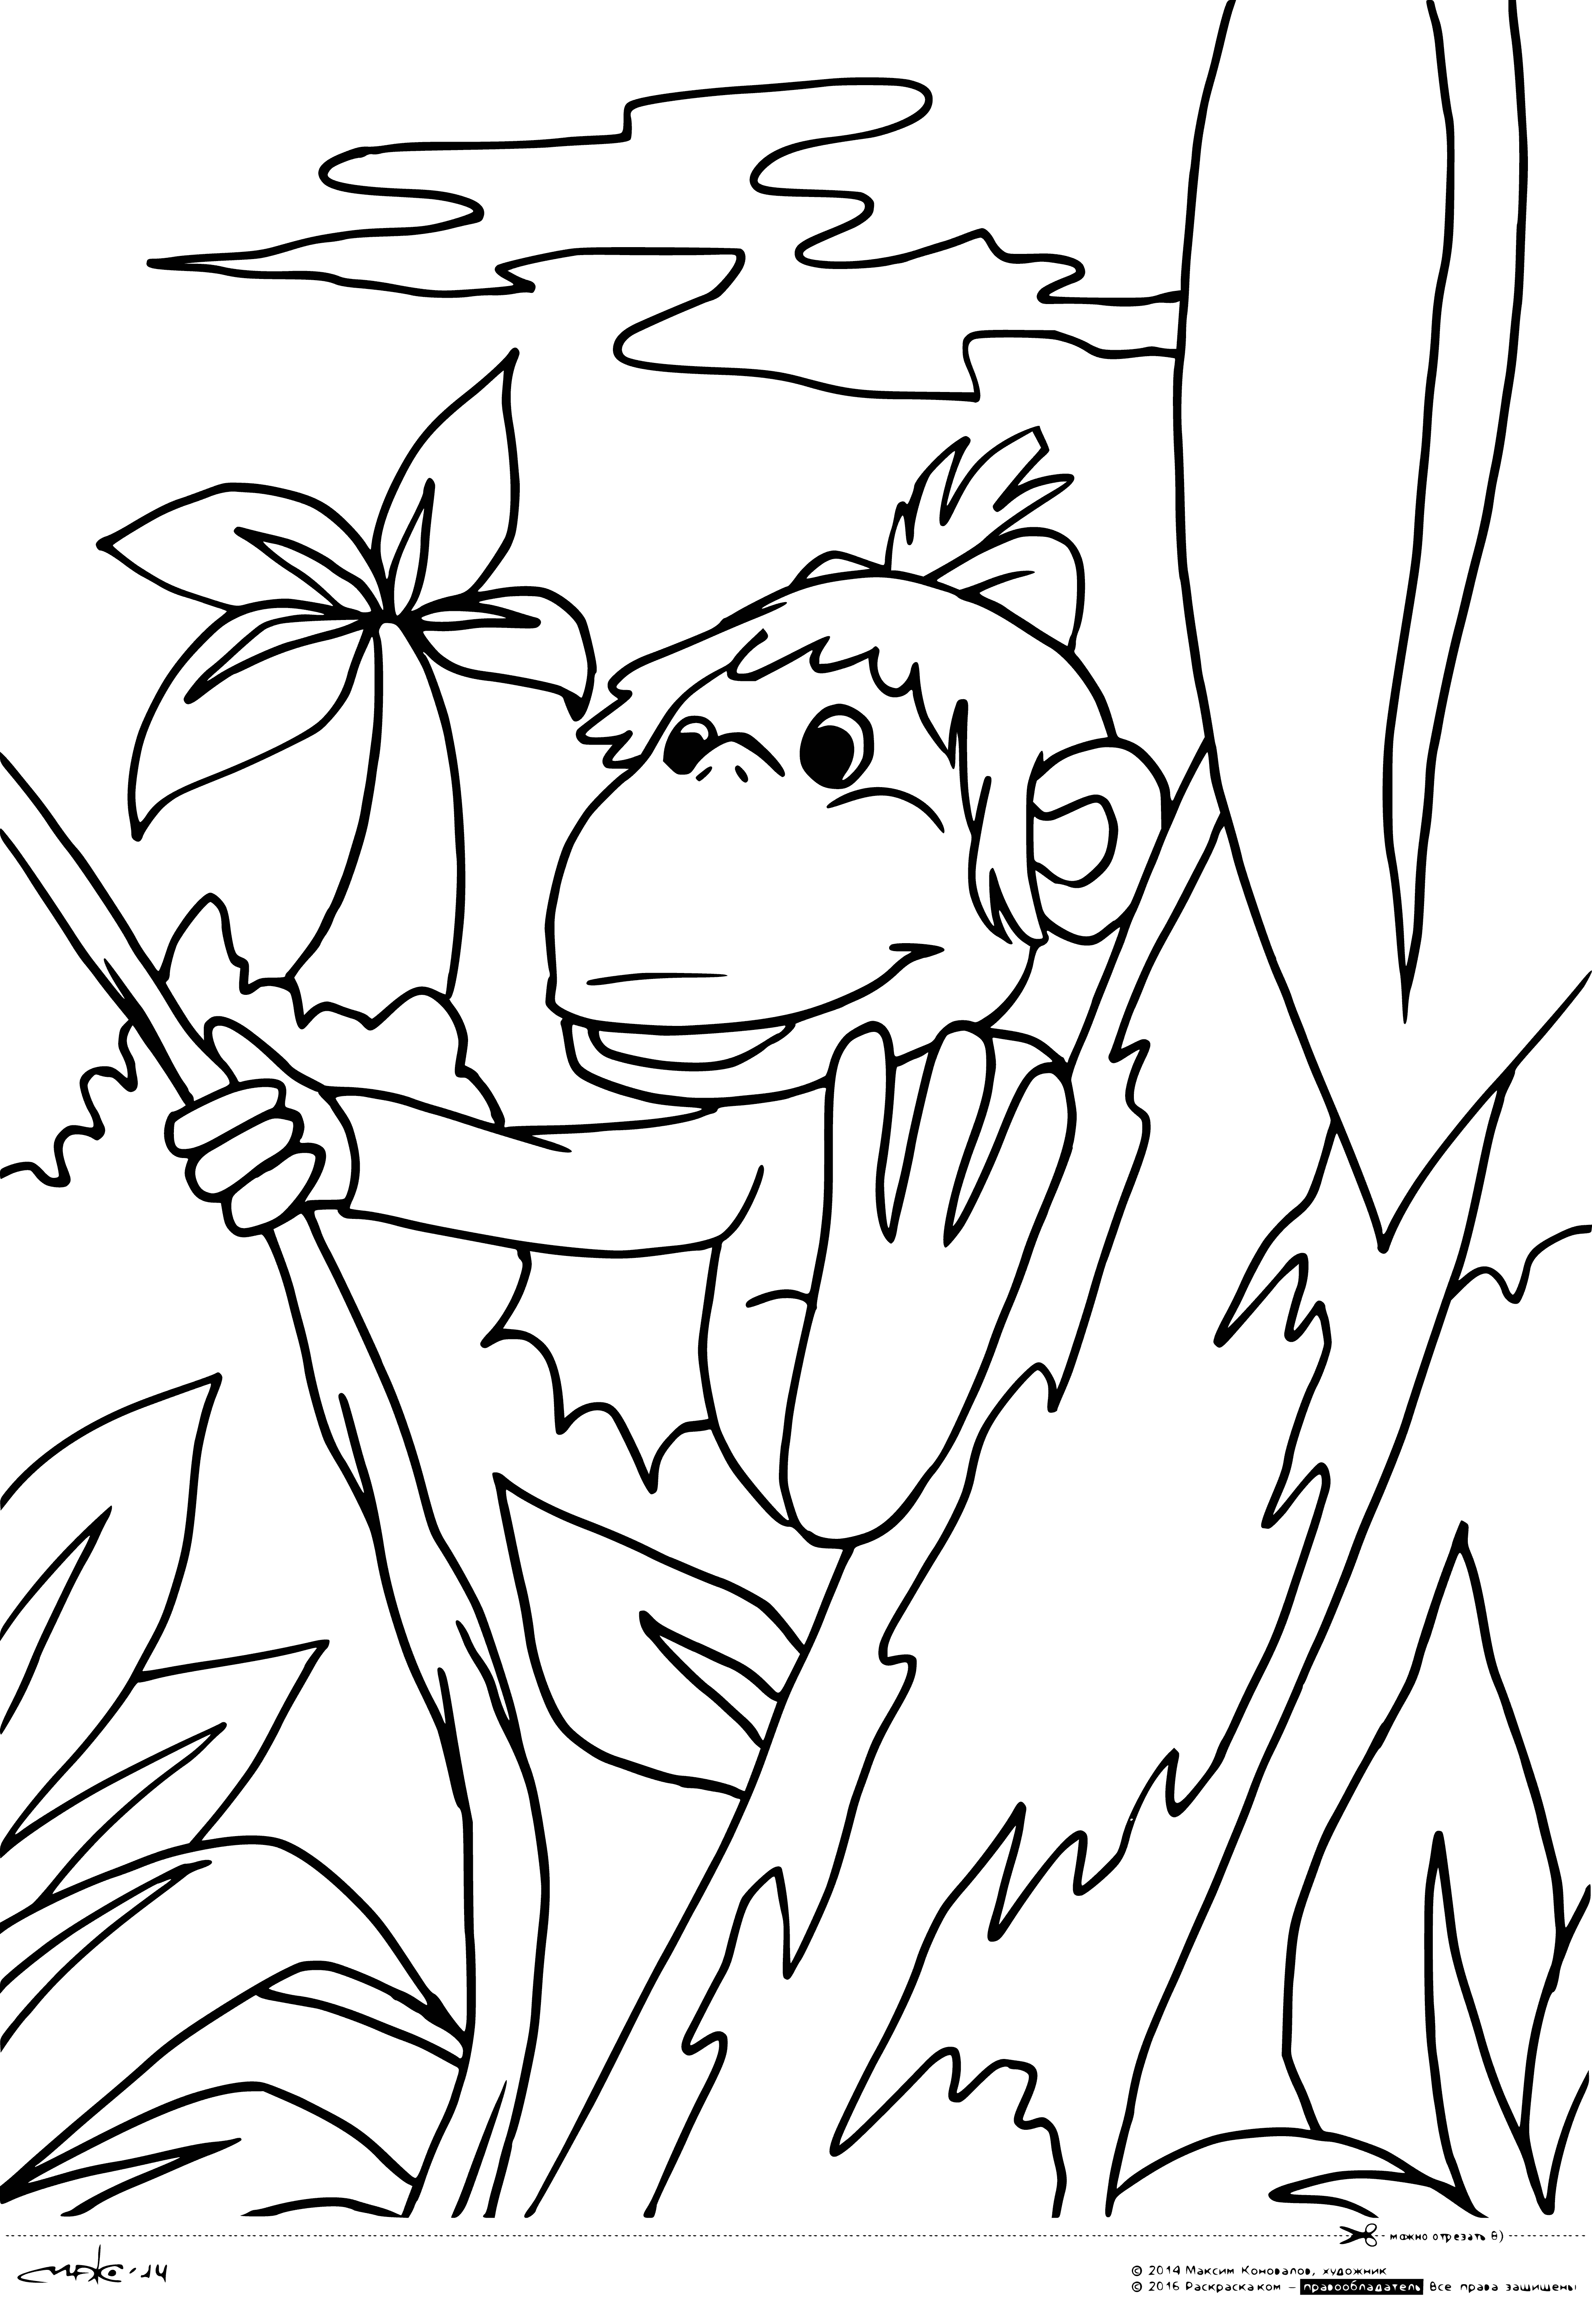 coloring page: 38 parrots in a coloring page, many colors & poses: sitting, flying, on ground.